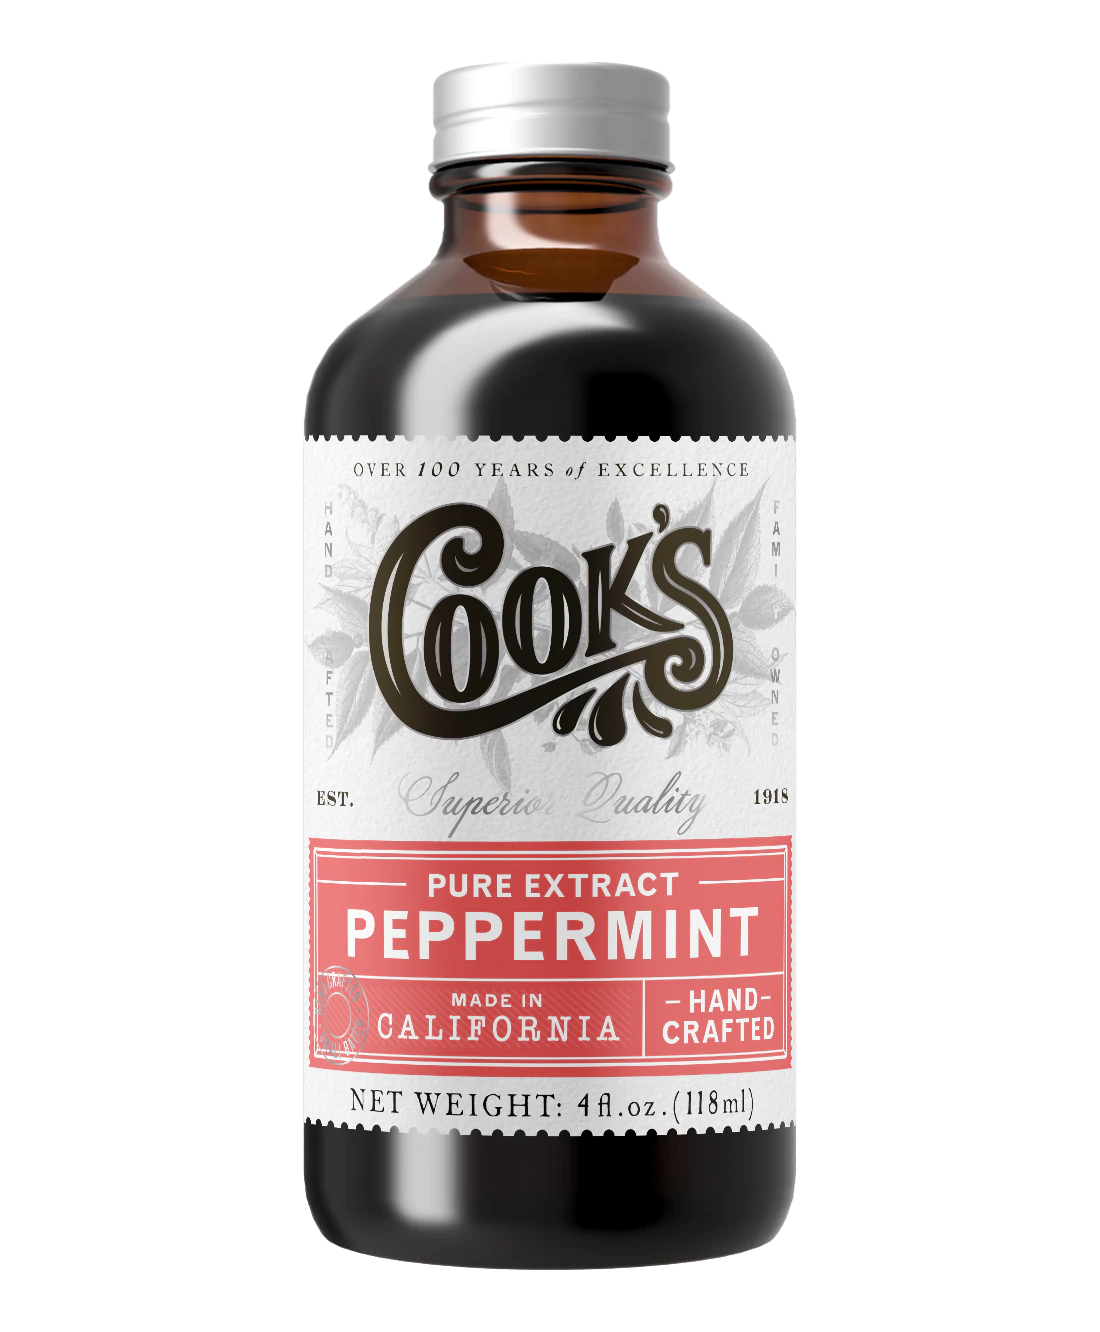 Cook's Peppermint Extract (Pure)